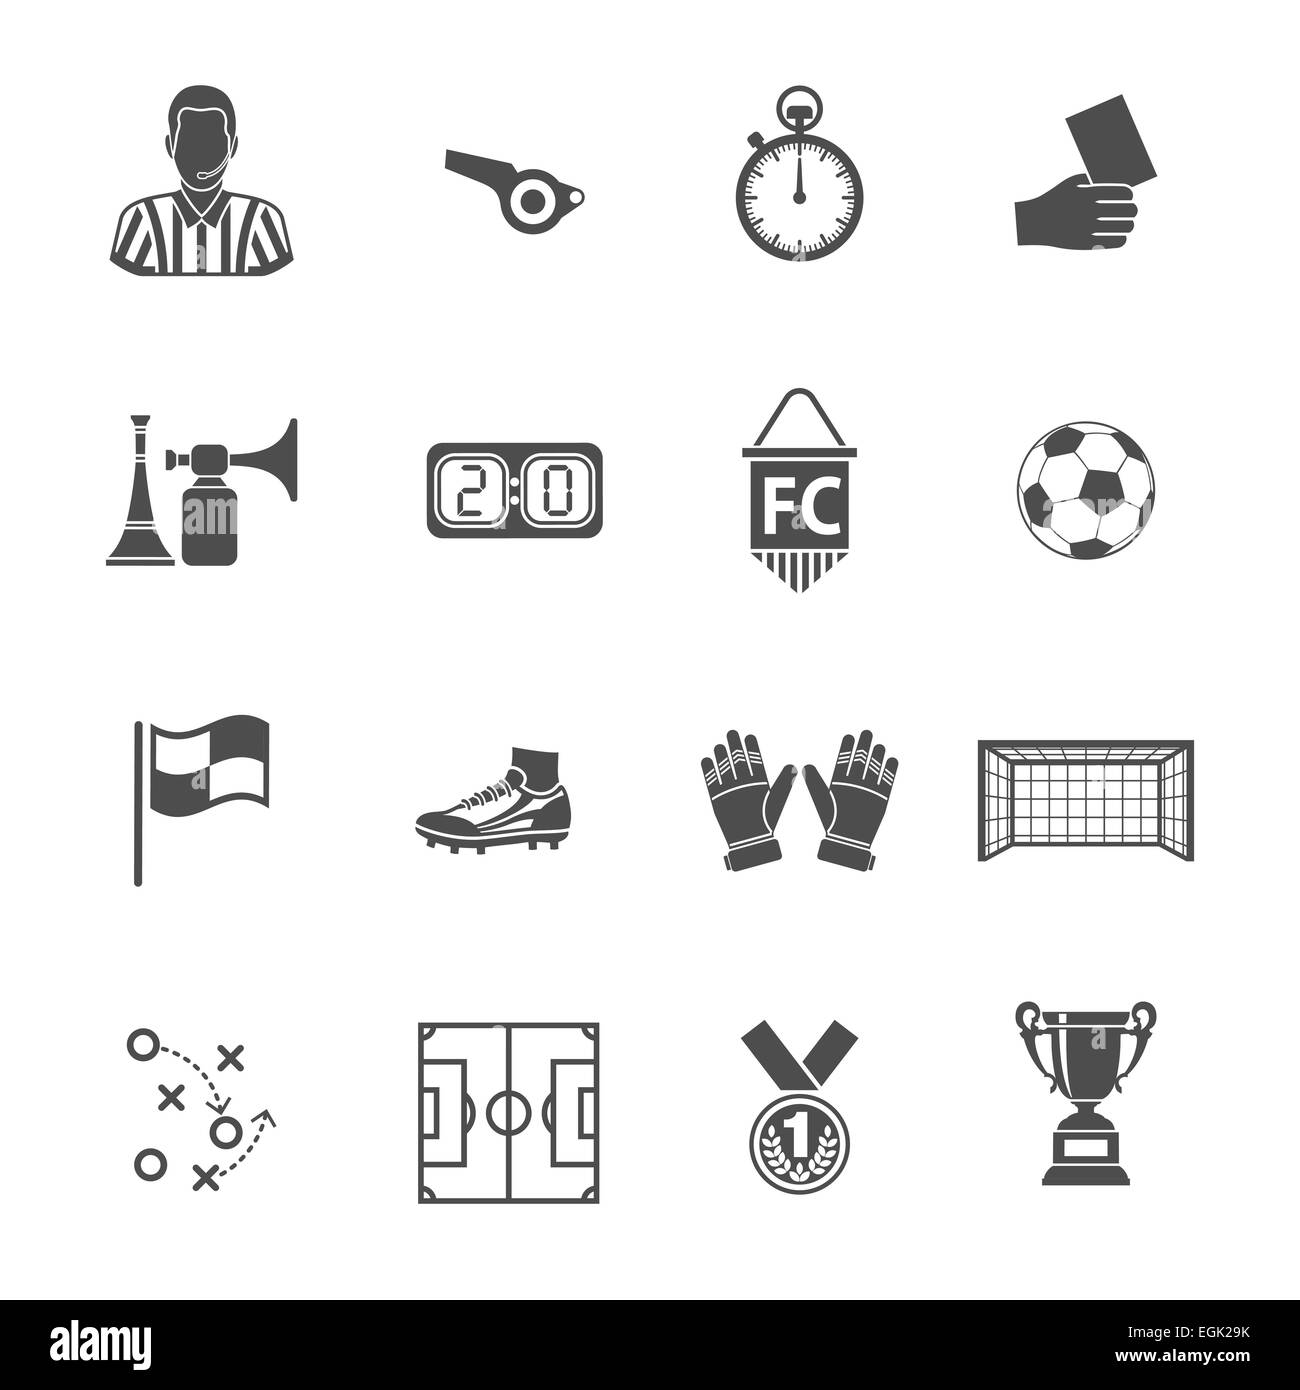 Soccer and Football Icon Set for Flyer, Poster, Web Site. Illustration isolated on white. Stock Photo